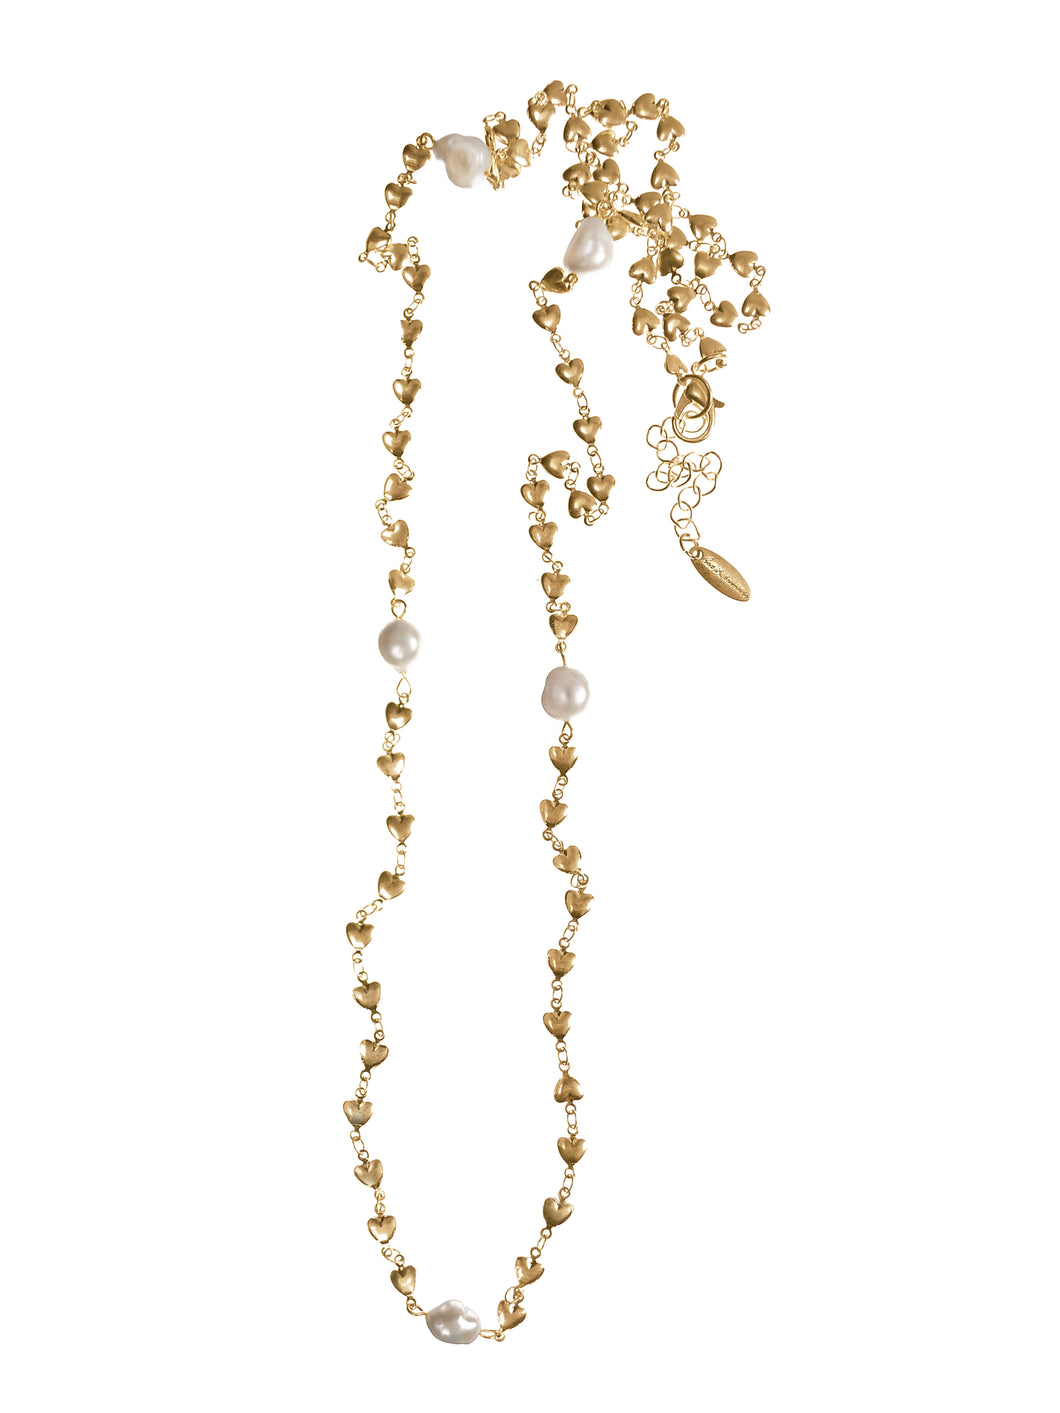 Hot Tomato Heart Chain W/Natural Pearls Captured - Worn Gold